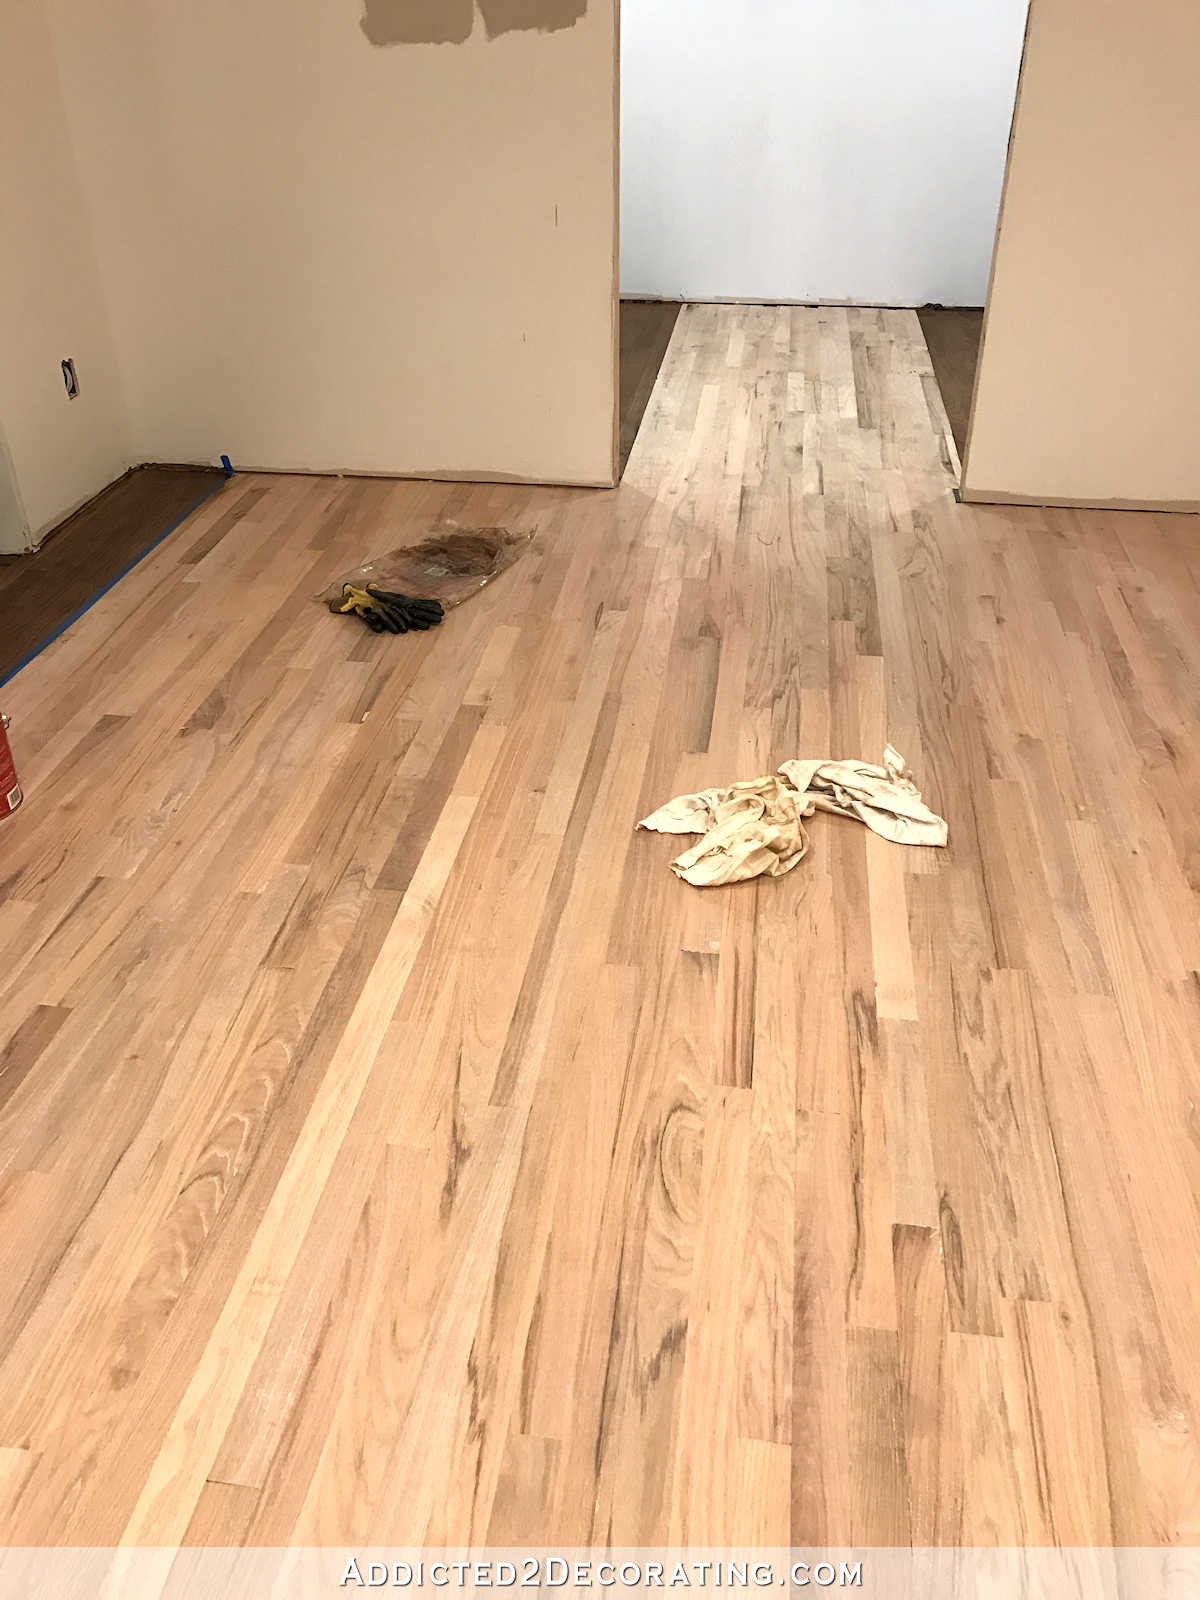 Change Hardwood Floor Stain Color Of Adventures In Staining My Red Oak Hardwood Floors Products Process Throughout Staining Red Oak Hardwood Floors 12 Breakfast Room and Center Of Pantry Left to